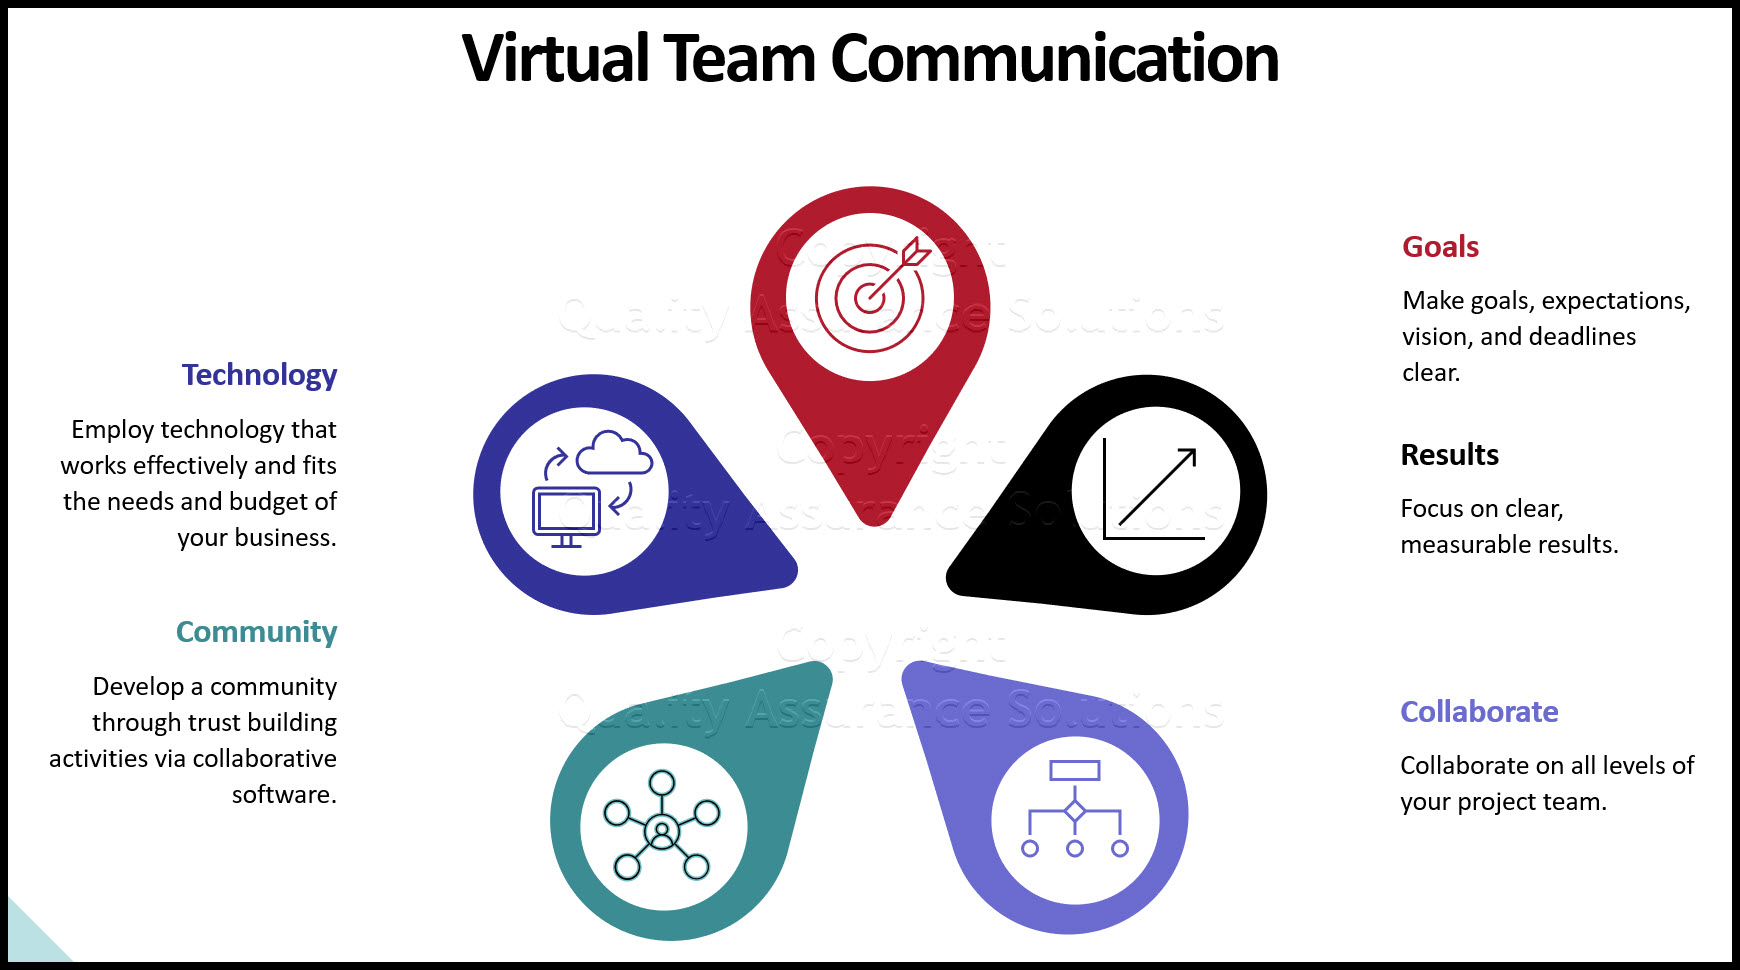 Virtual Team Communication is the future of business in the new global economy.